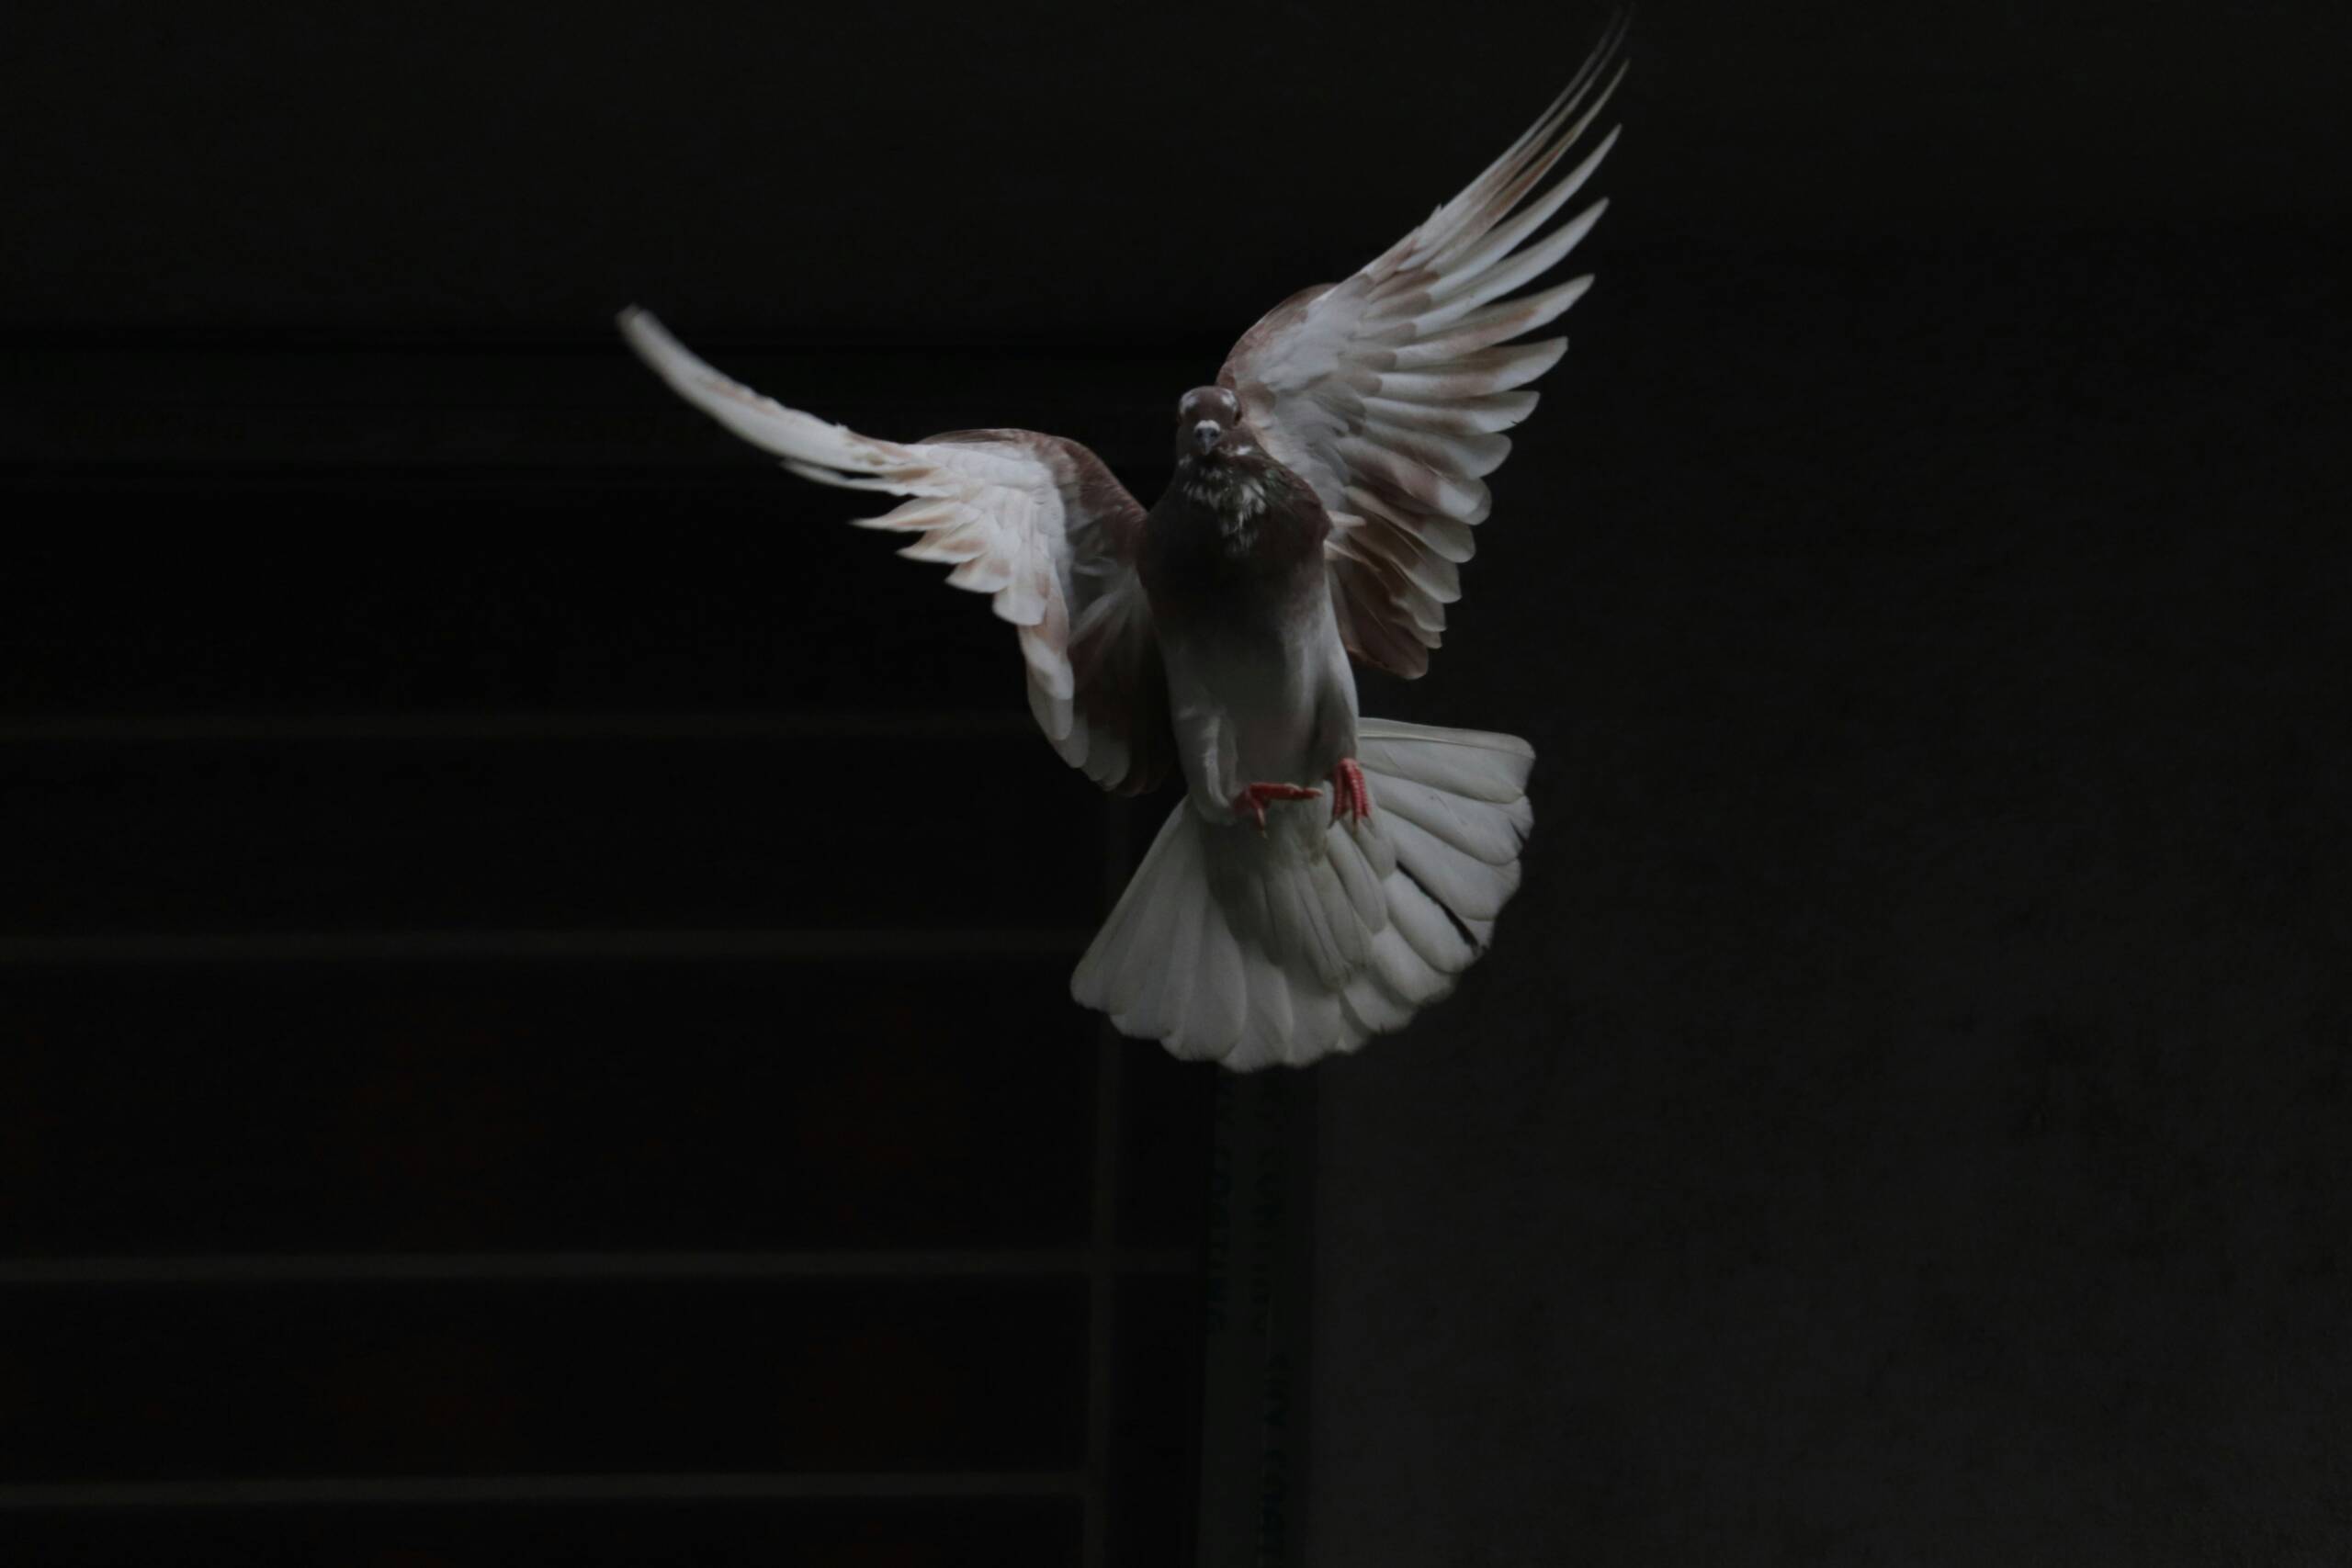 A pigeon flying in the dark with its wings spread.